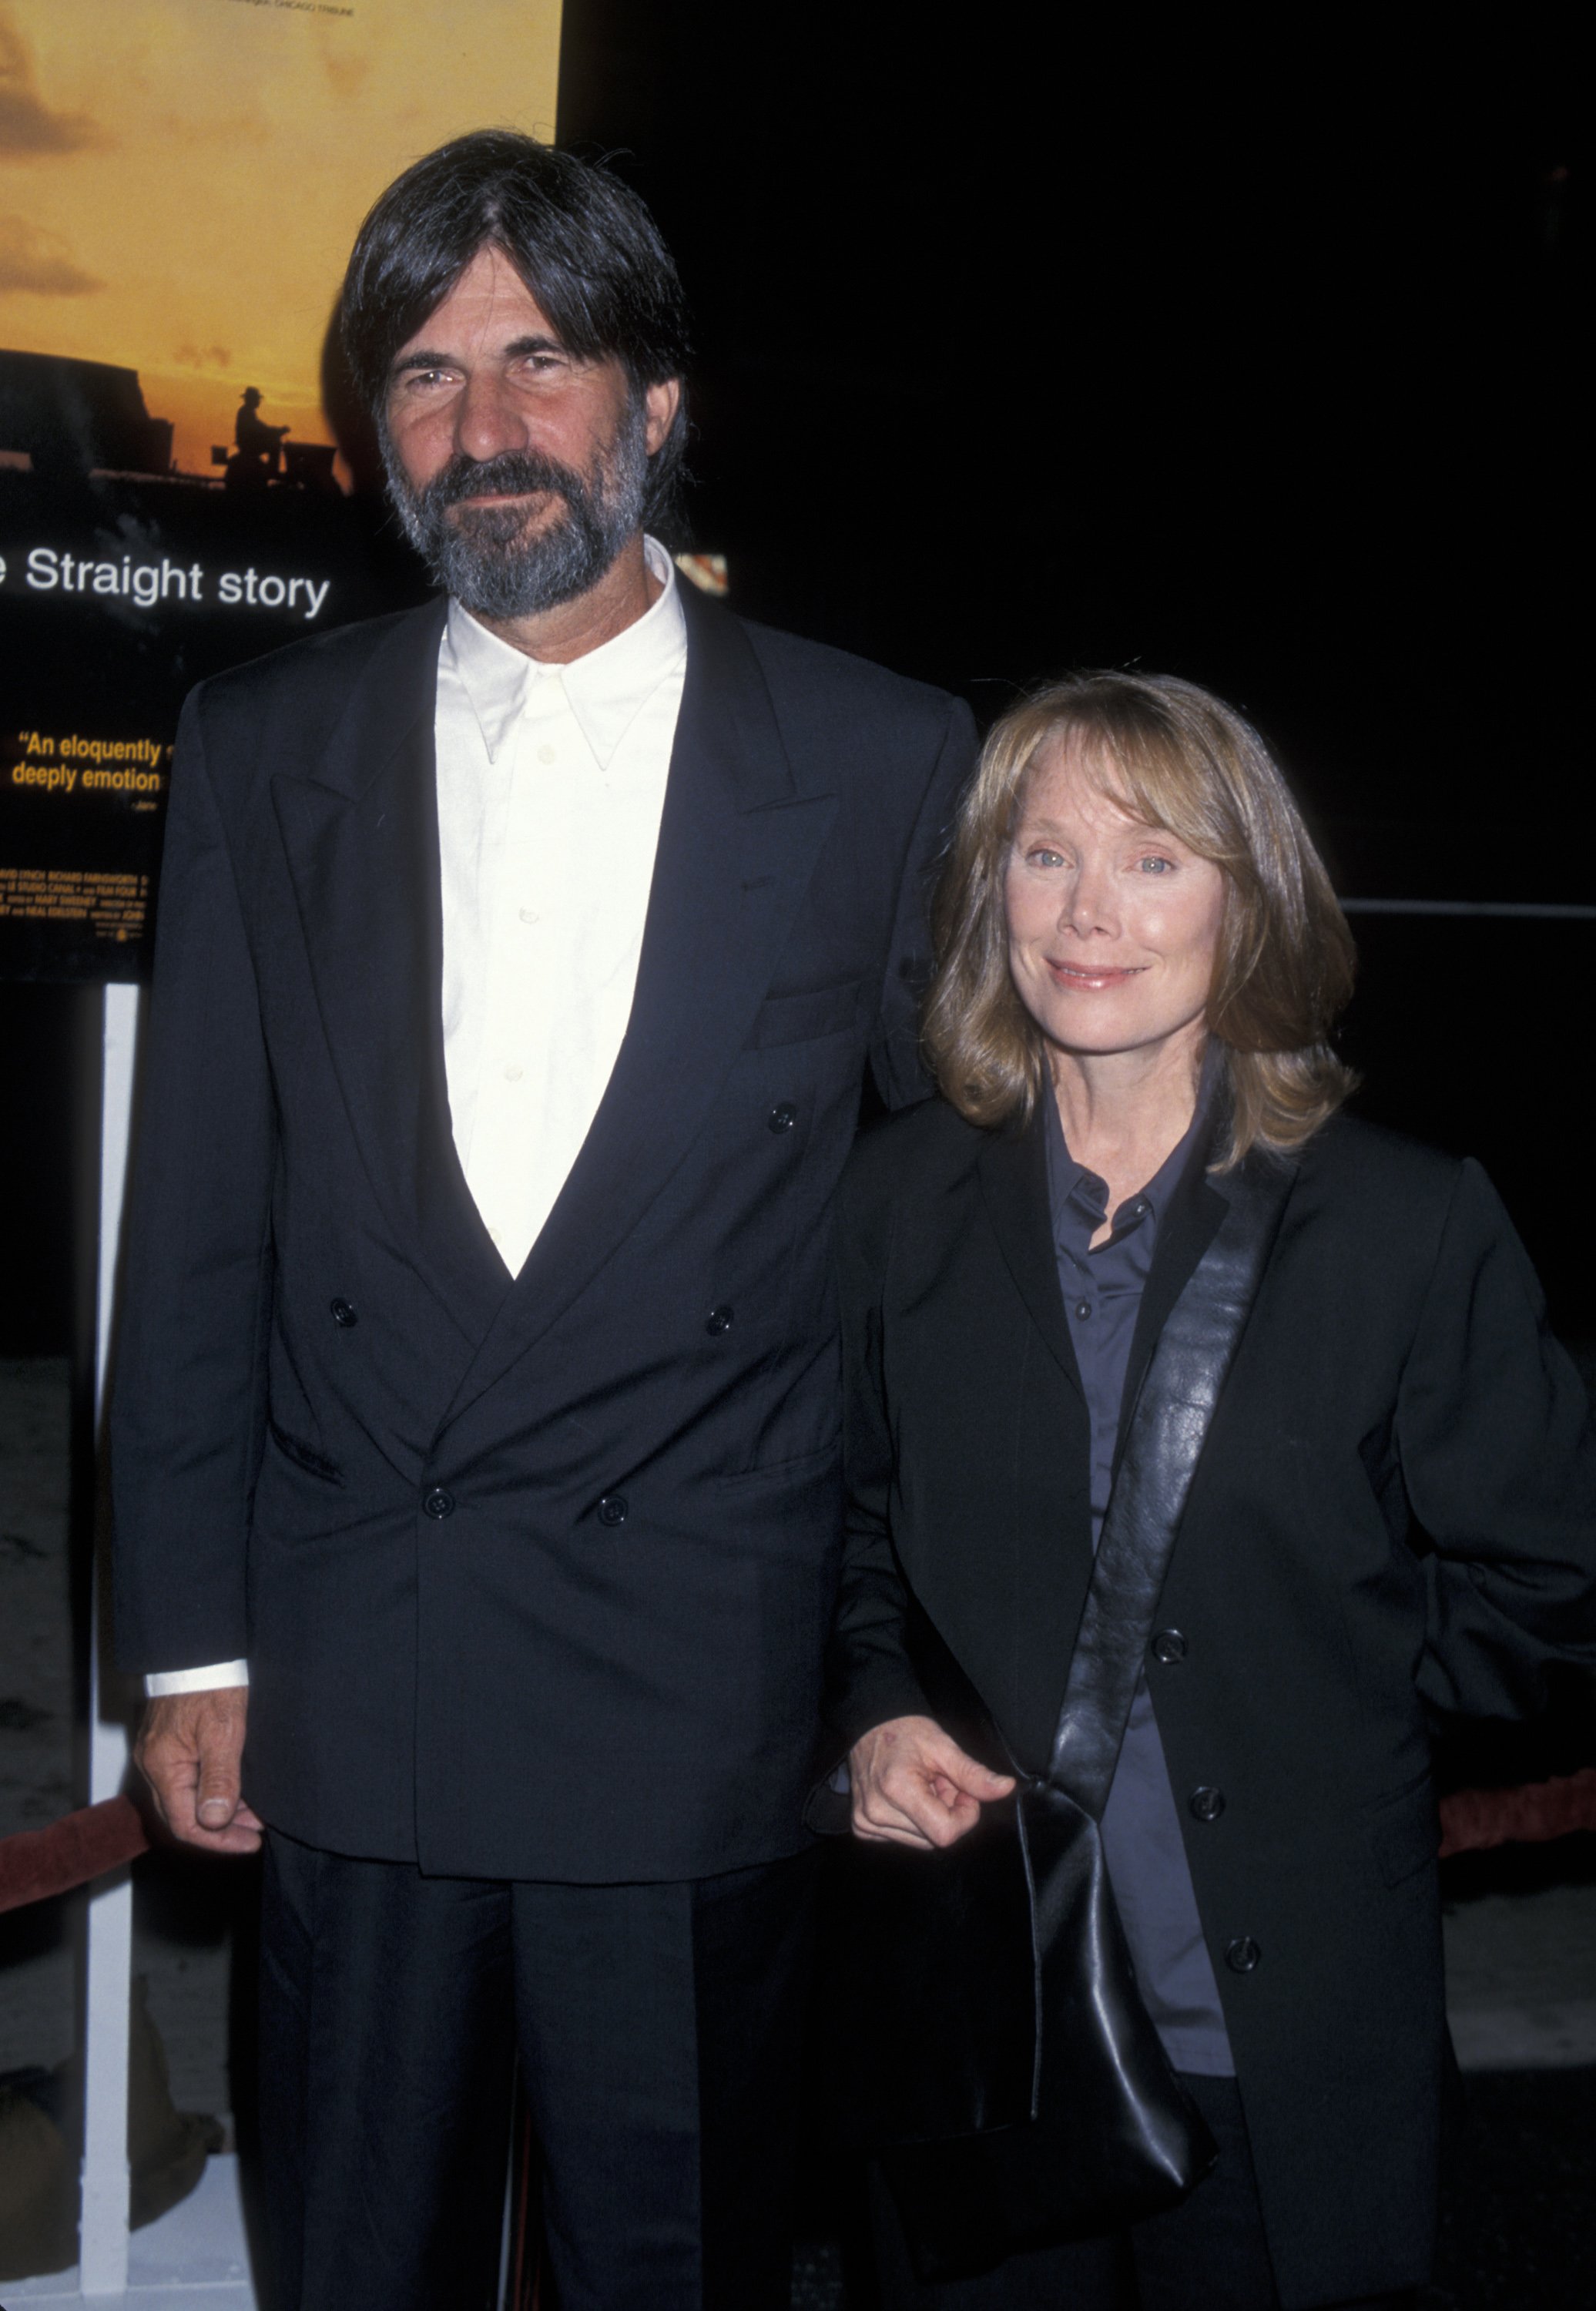 Jack Fisk and Sissy Spacek during "The Straight Story" Los Angeles Premiere at El Captain Theatre in Hollywood, California | Source: Getty Images